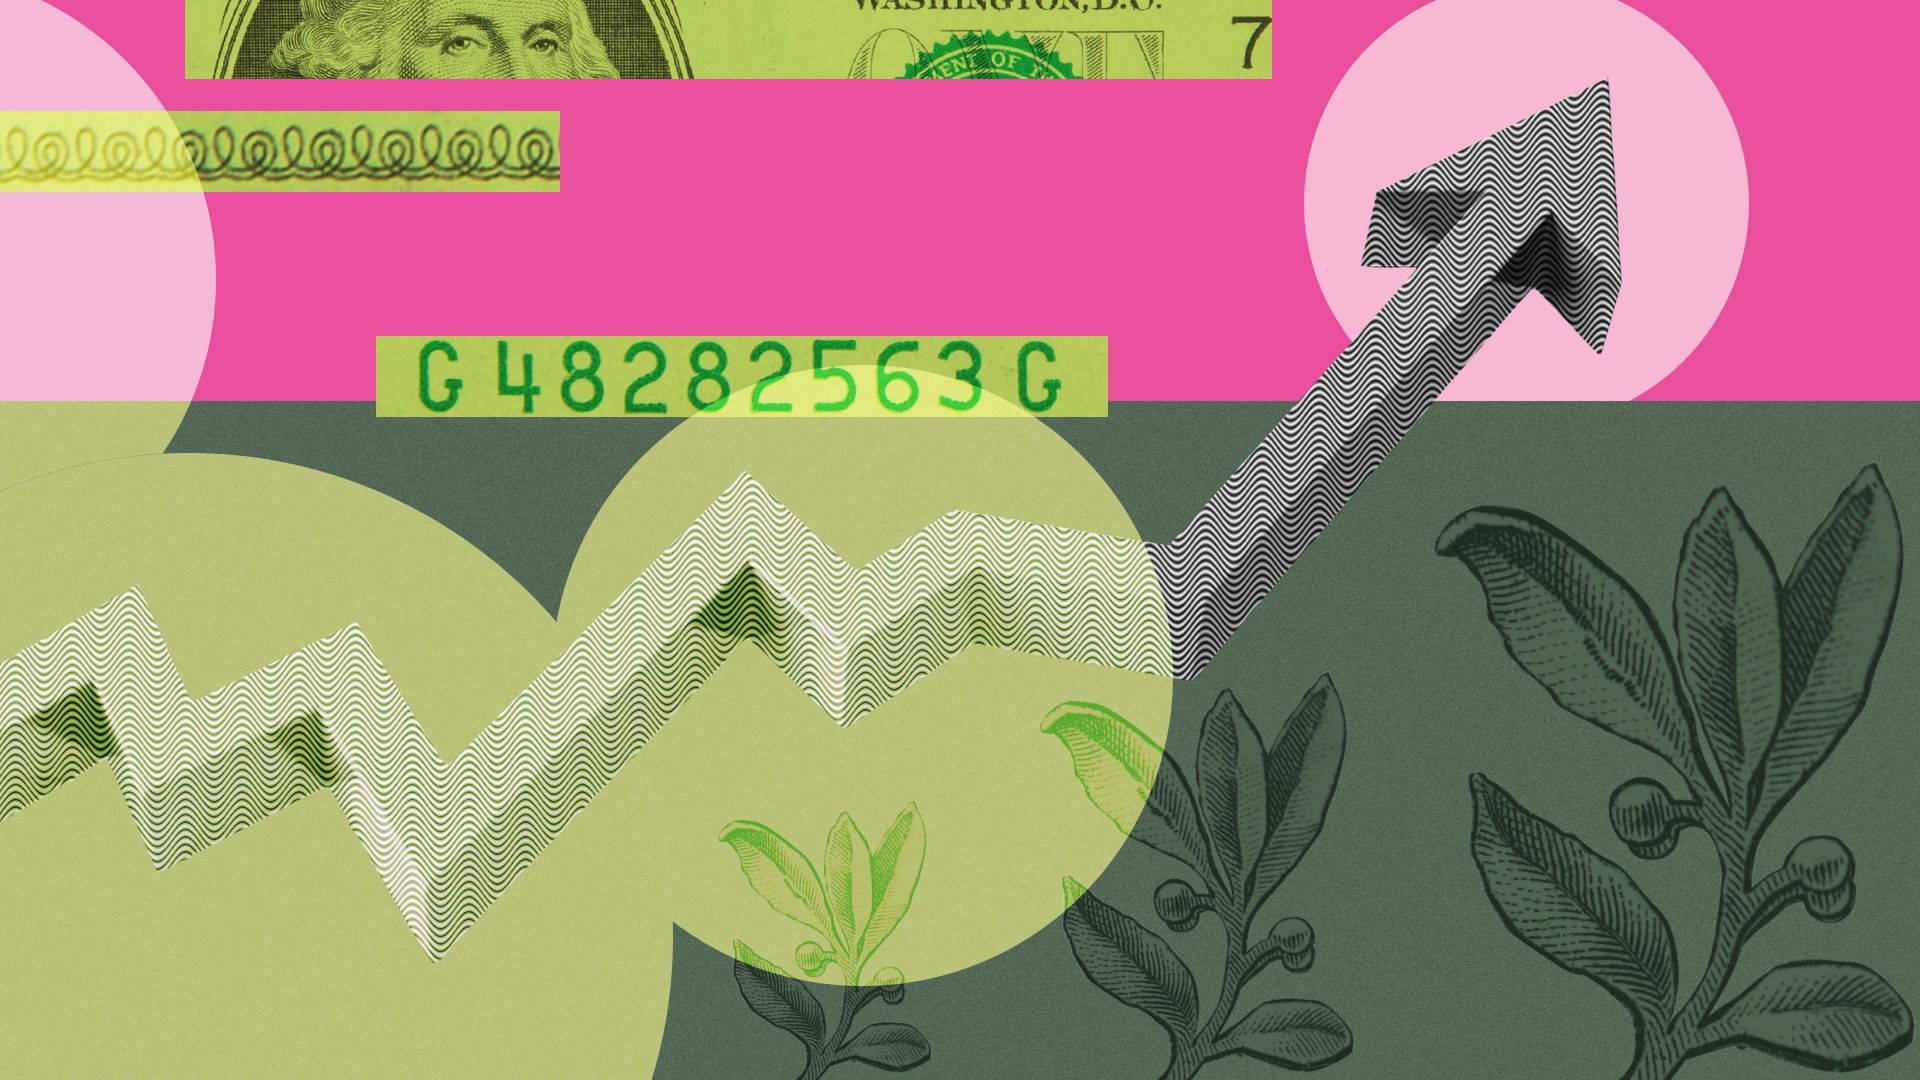 Illustration of an upward arrow surrounded by money elements and abstract shapes.